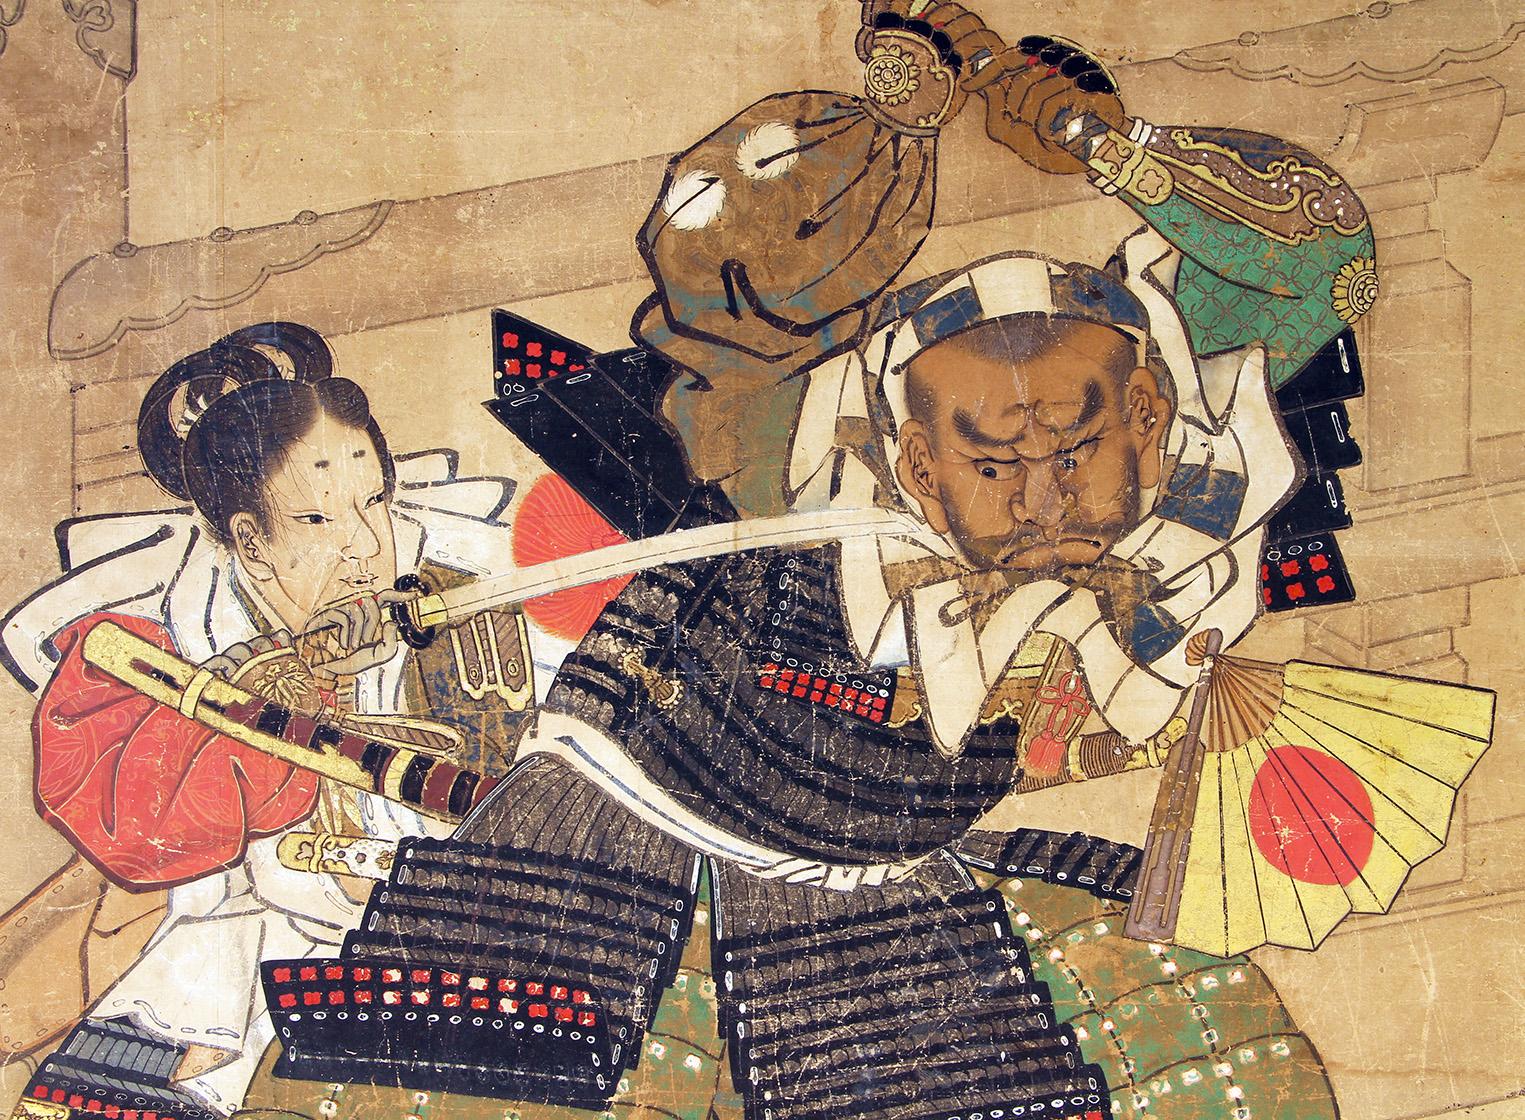 Large 18th century painting executed with pigments and gold leaf on rice paper of the fight on the Gojo bridge in Kyoto between the famous Buddhist monk Benkei and the young samurai Yoshitsune.
Lucio Morini guarantees the authenticity and origin of